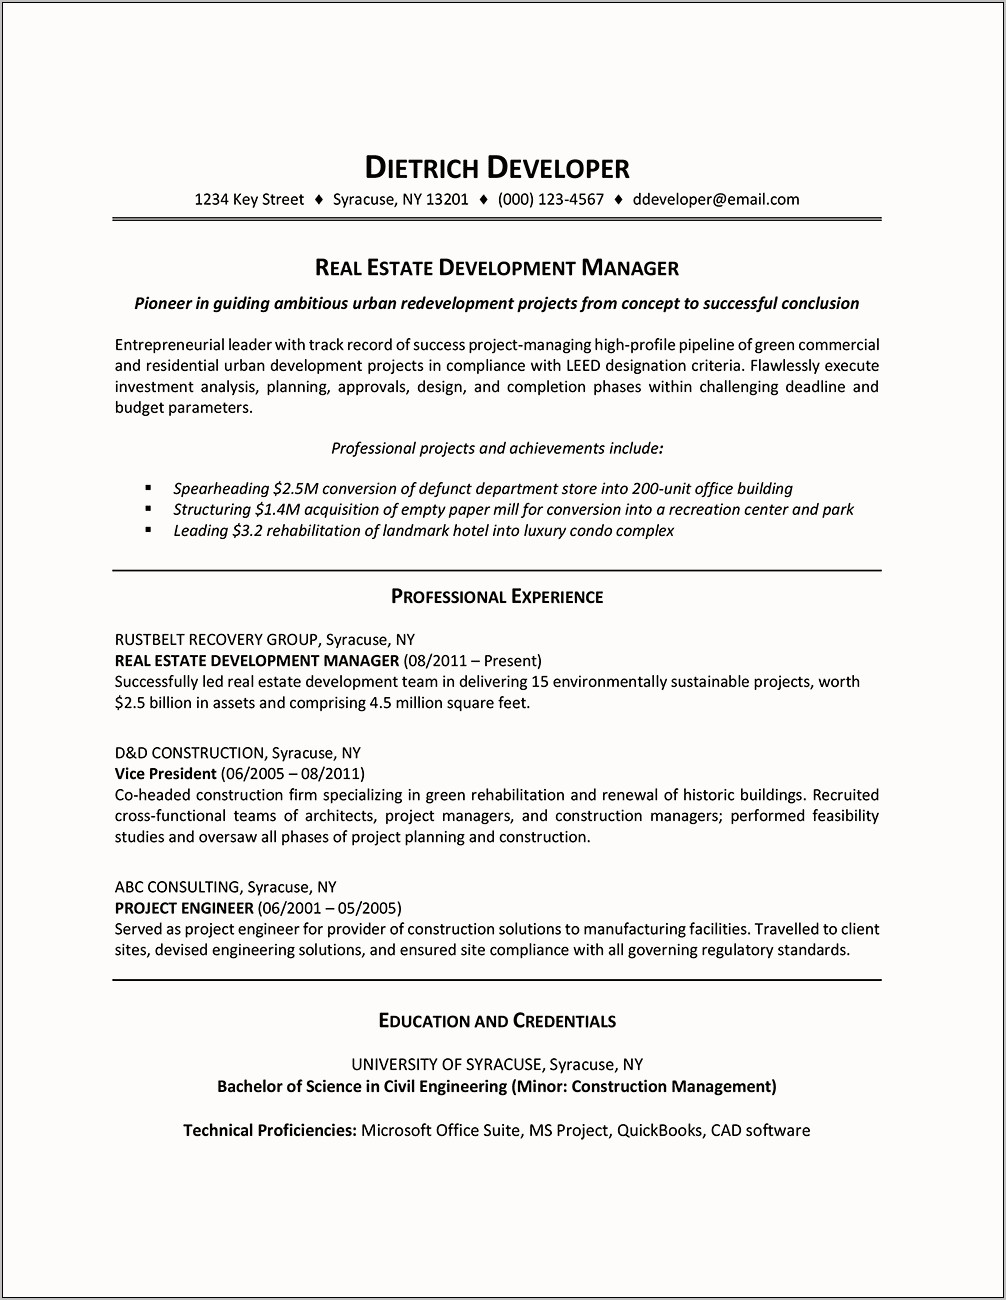 Career Highlights Qualifications For Resume Examples